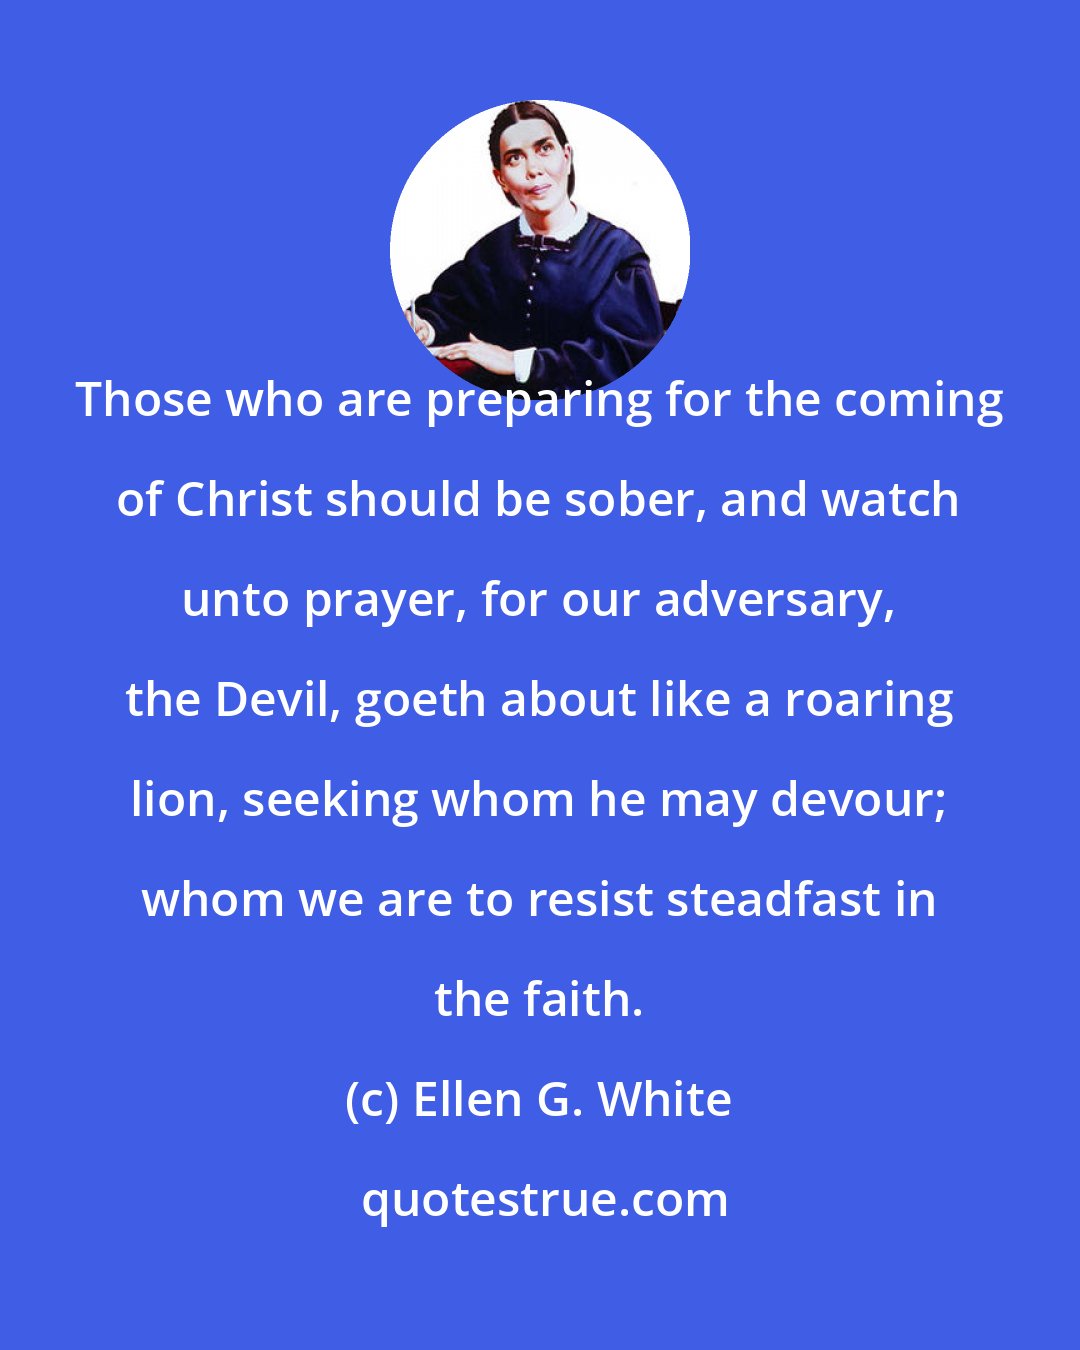 Ellen G. White: Those who are preparing for the coming of Christ should be sober, and watch unto prayer, for our adversary, the Devil, goeth about like a roaring lion, seeking whom he may devour; whom we are to resist steadfast in the faith.